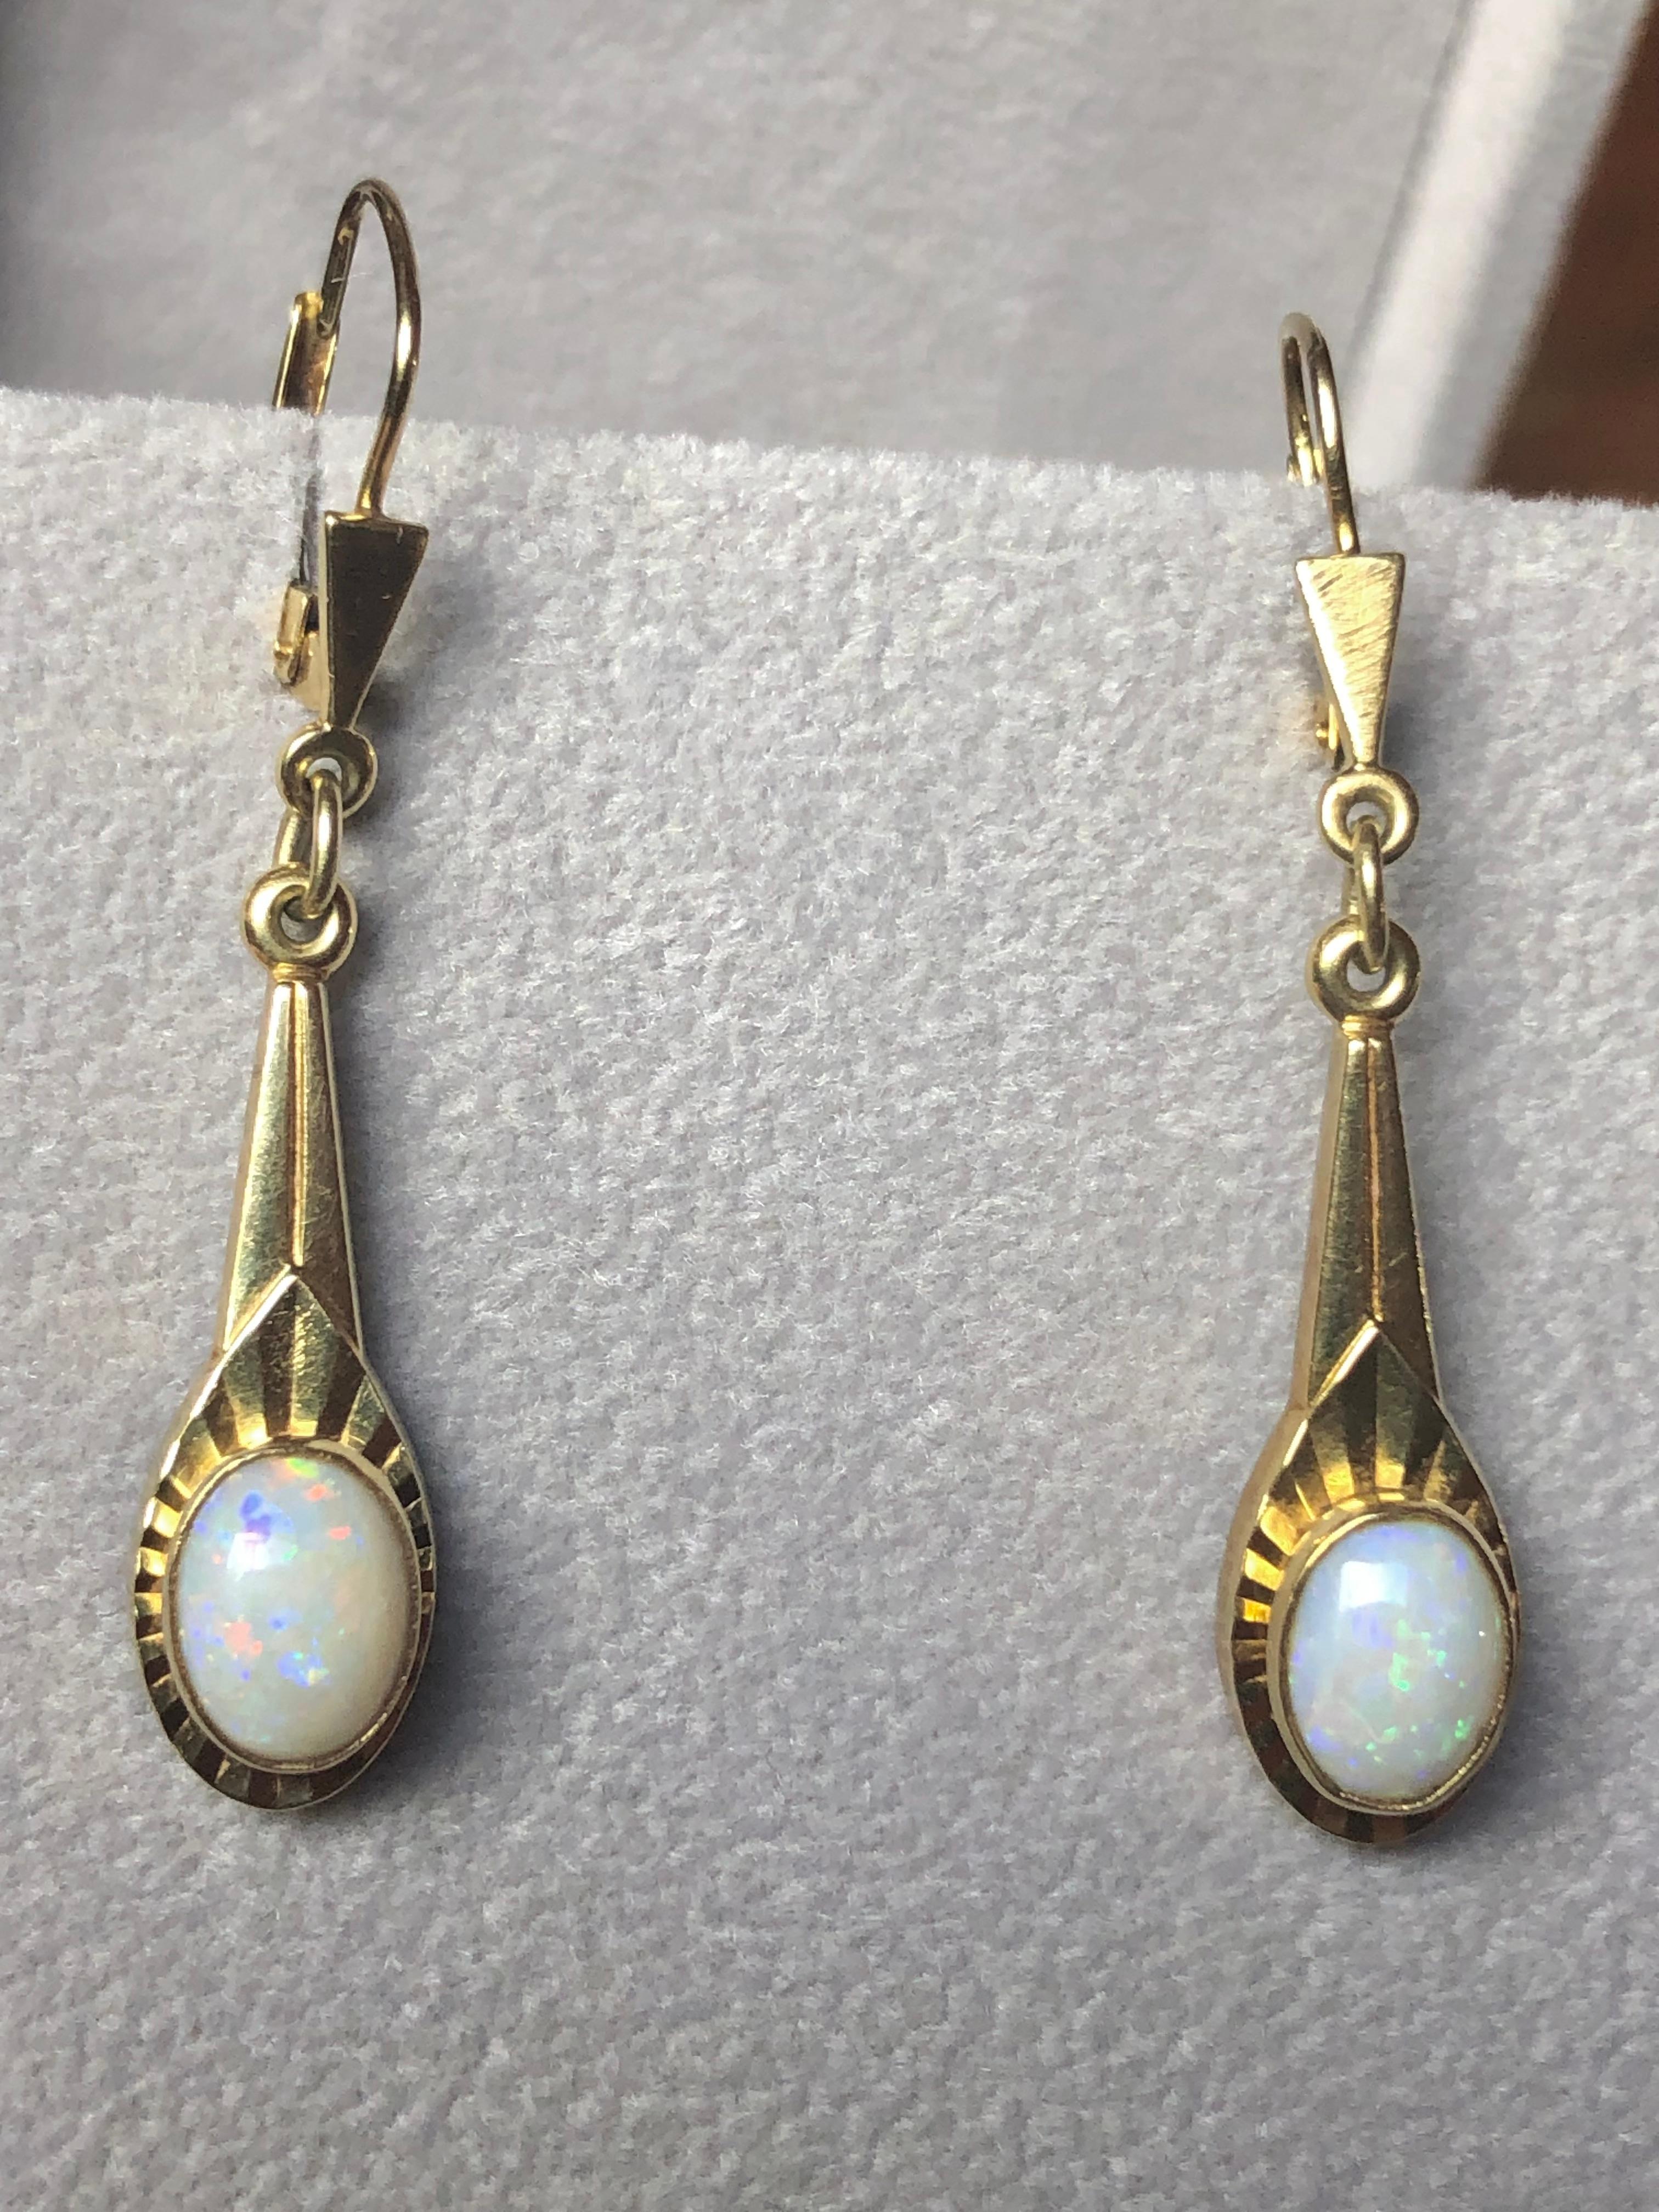 Vintage! These classic dangling earrings each feature an oval-shaped opal set in a 14KT bezel, hanging off a triangular 14KT vintage motif.  Hallmarks: 14K  Length: 1.5-inch total length.  Total weight: 4.1g